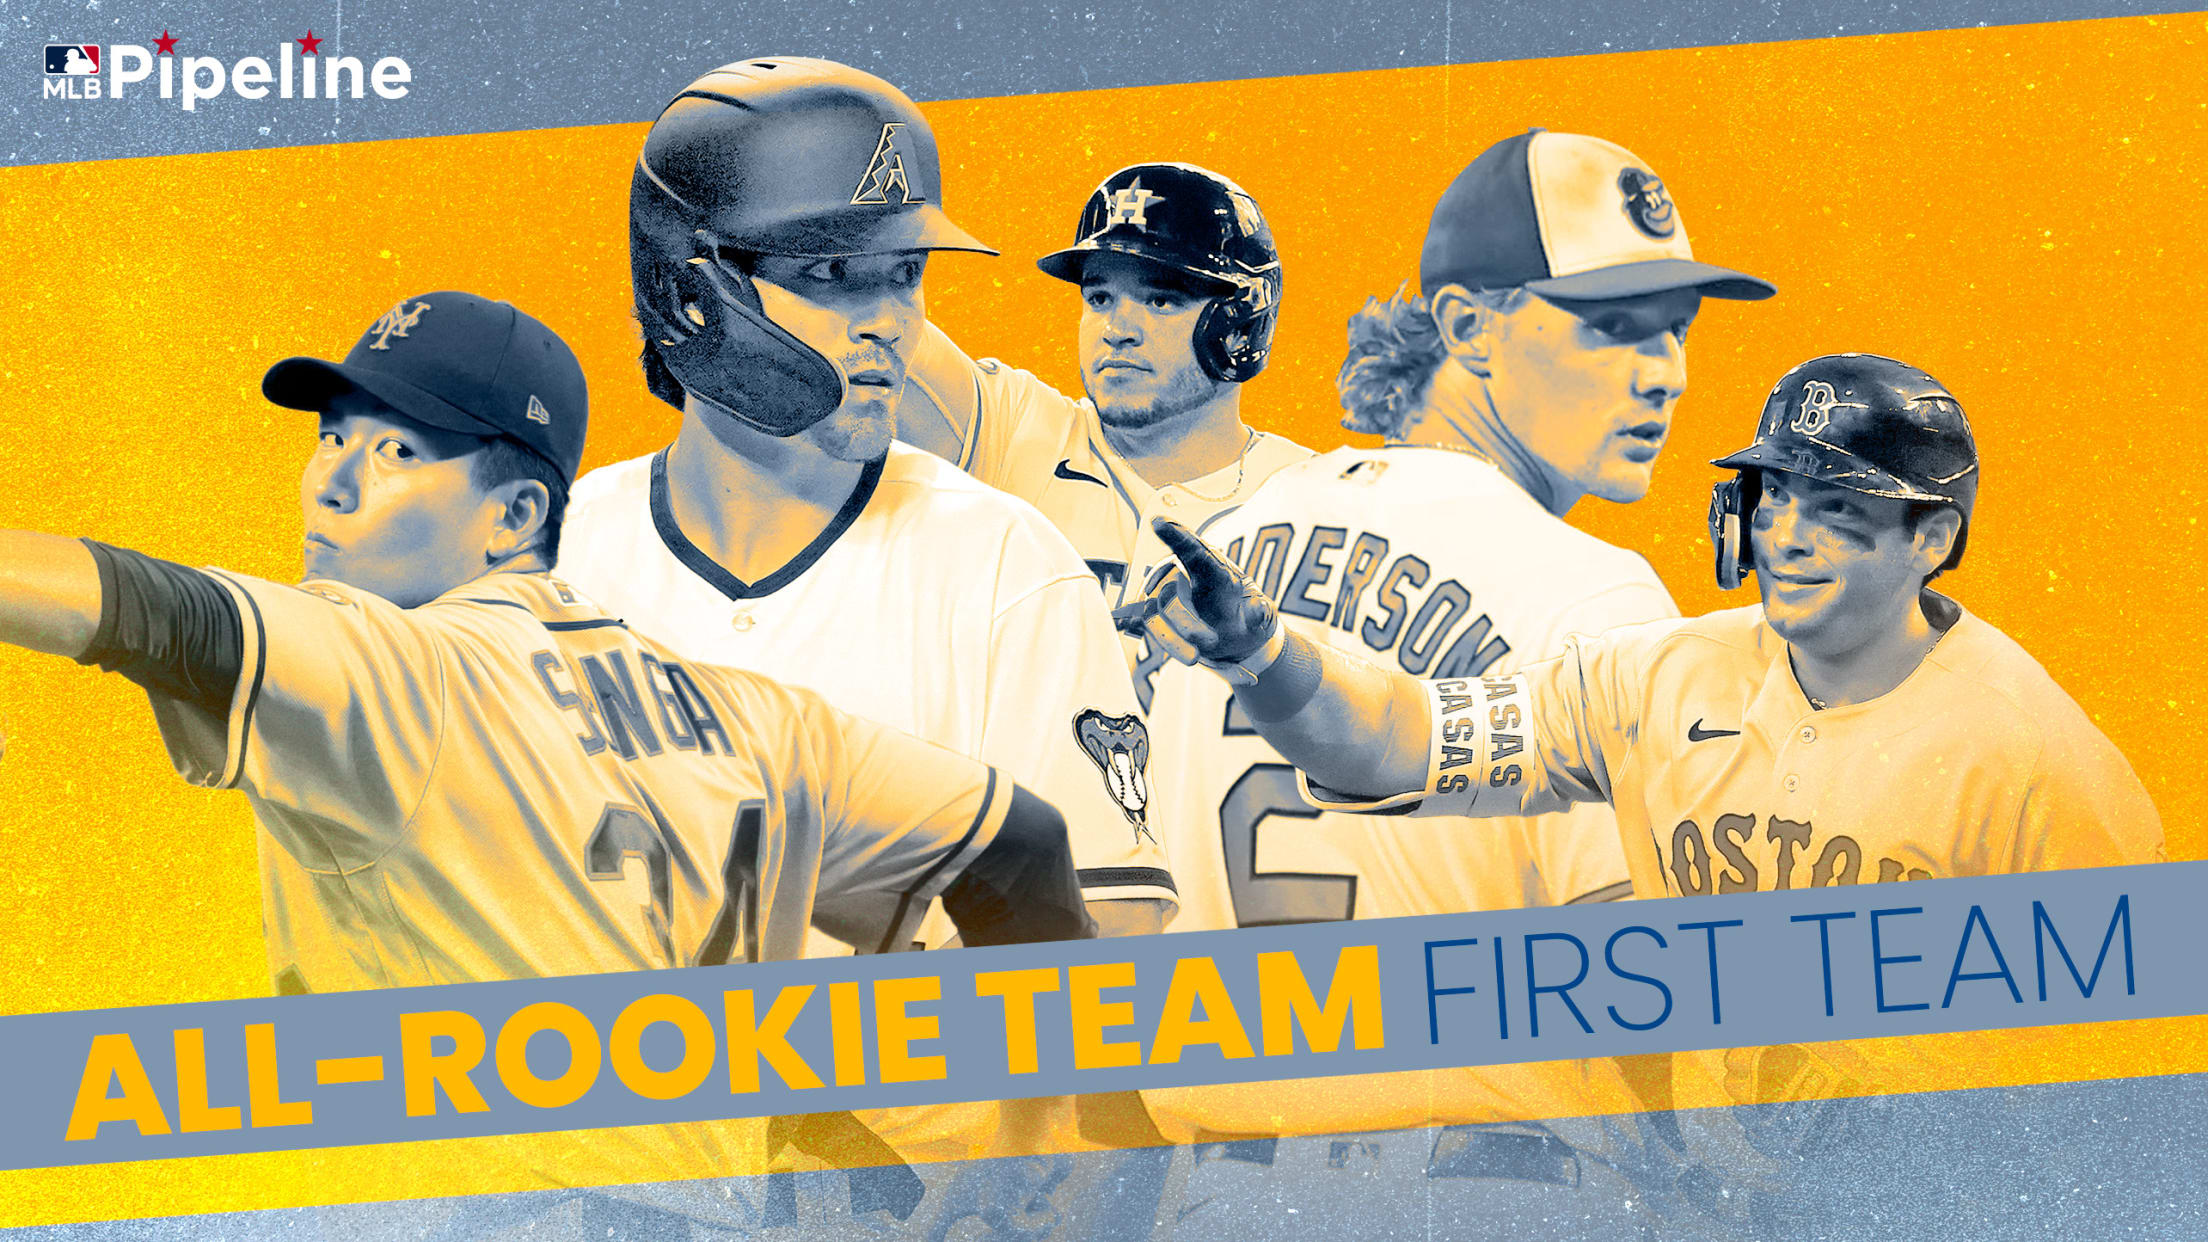 5 representatives of the All-Rookie Team